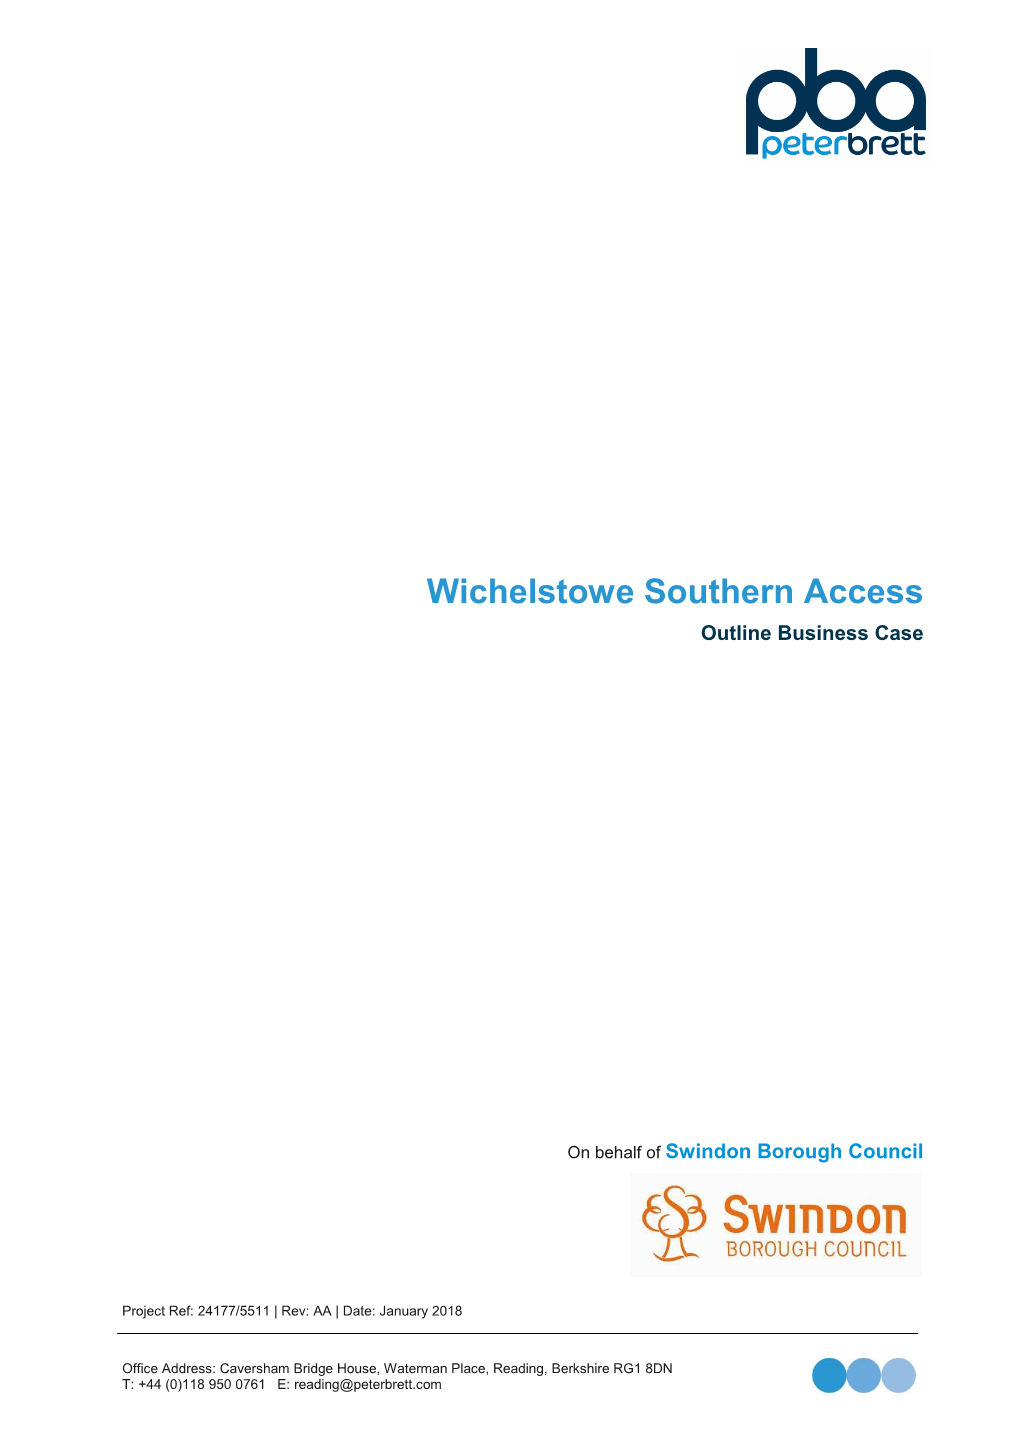 Wichelstowe Southern Access Outline Business Case